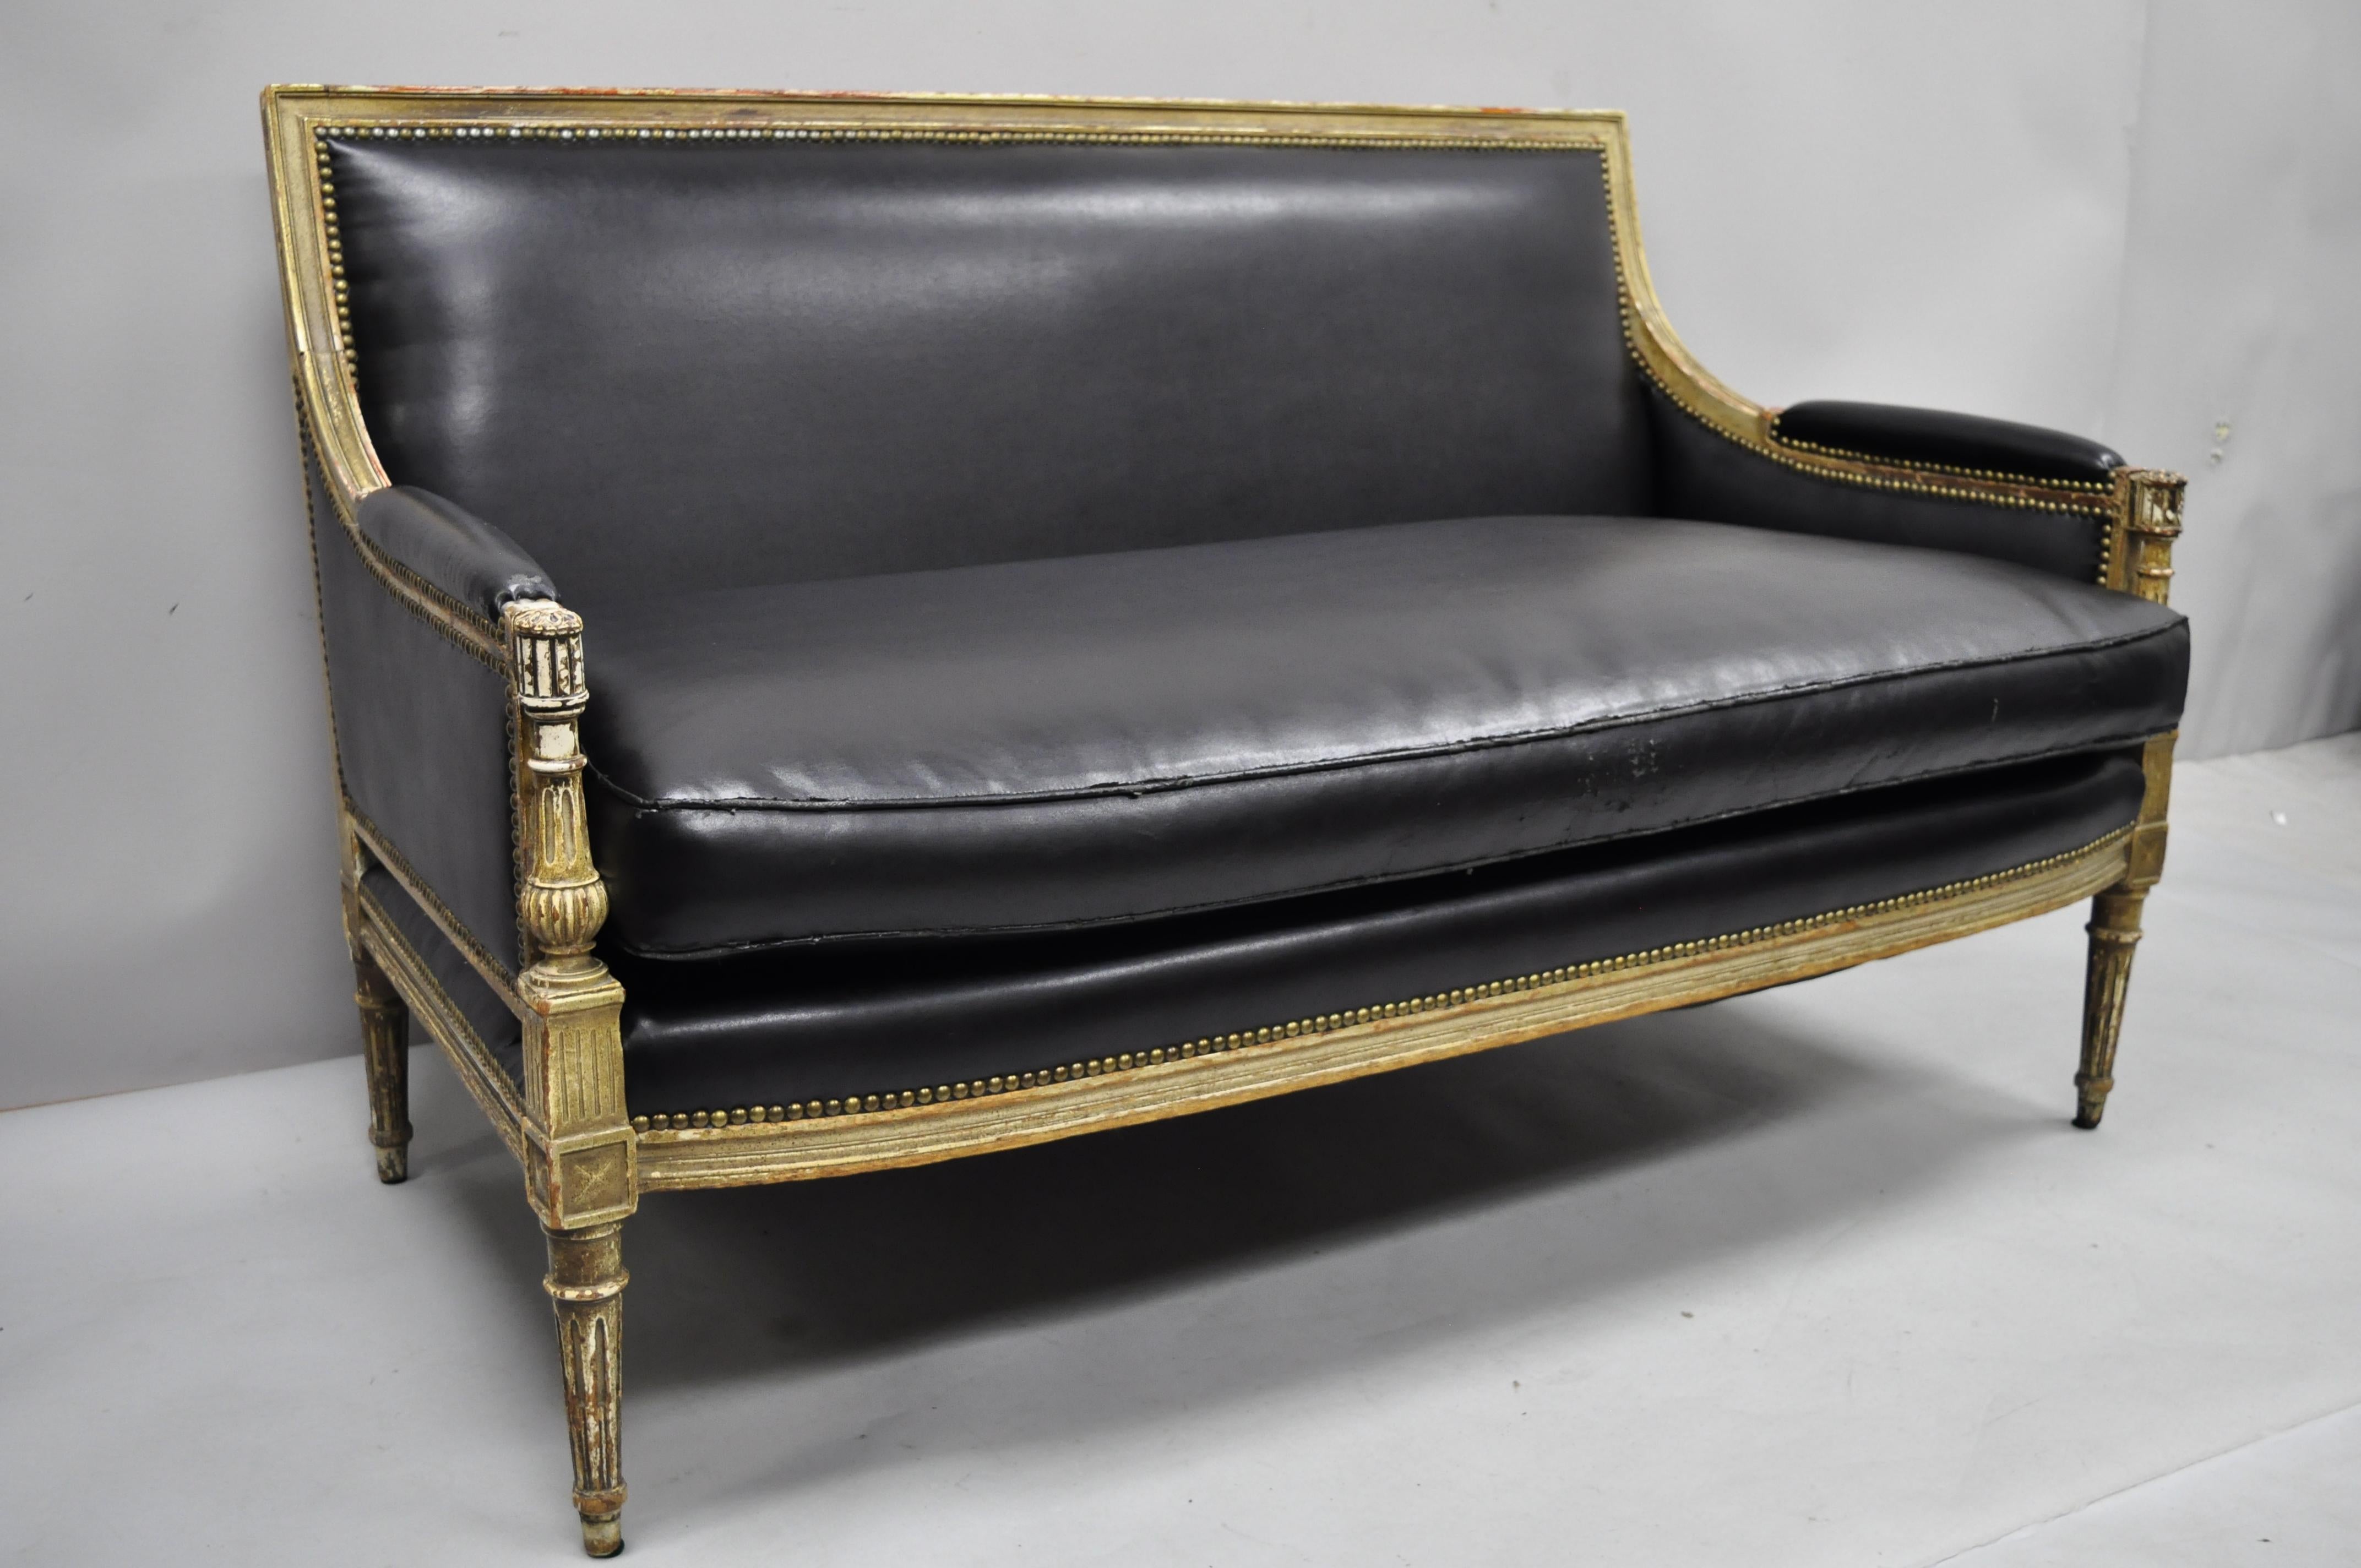 Antique French Louis XVI Maison Jansen style distress painted parcel-gilt settee loveseat. Item features a desirable distress painted parcel-gilt frame, black vinyl upholstery, stretcher supported back, finely carved details, tapered legs, quality